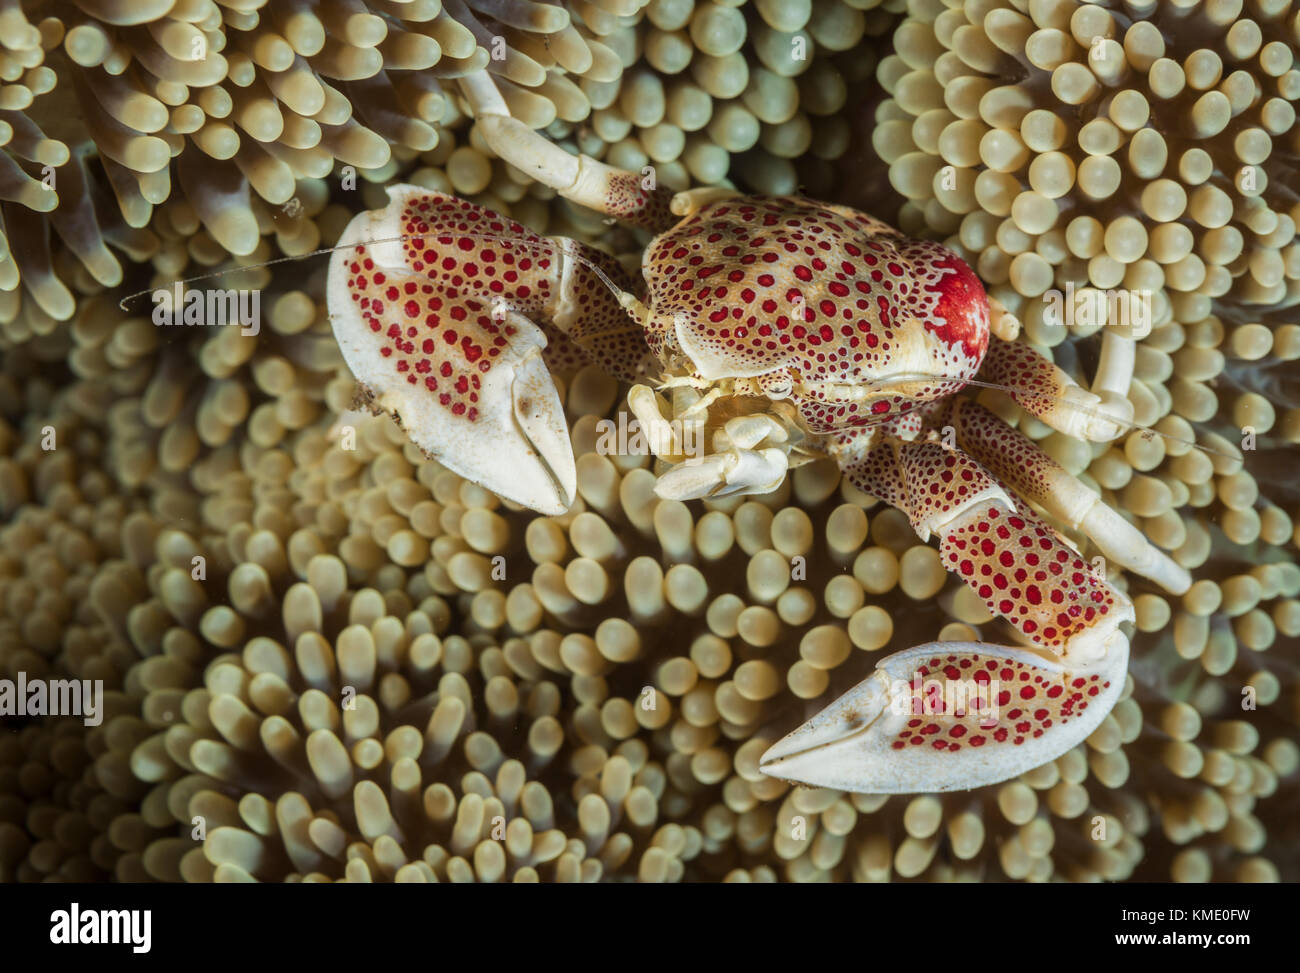 Porcelain crab in a carpet anemone Stock Photo